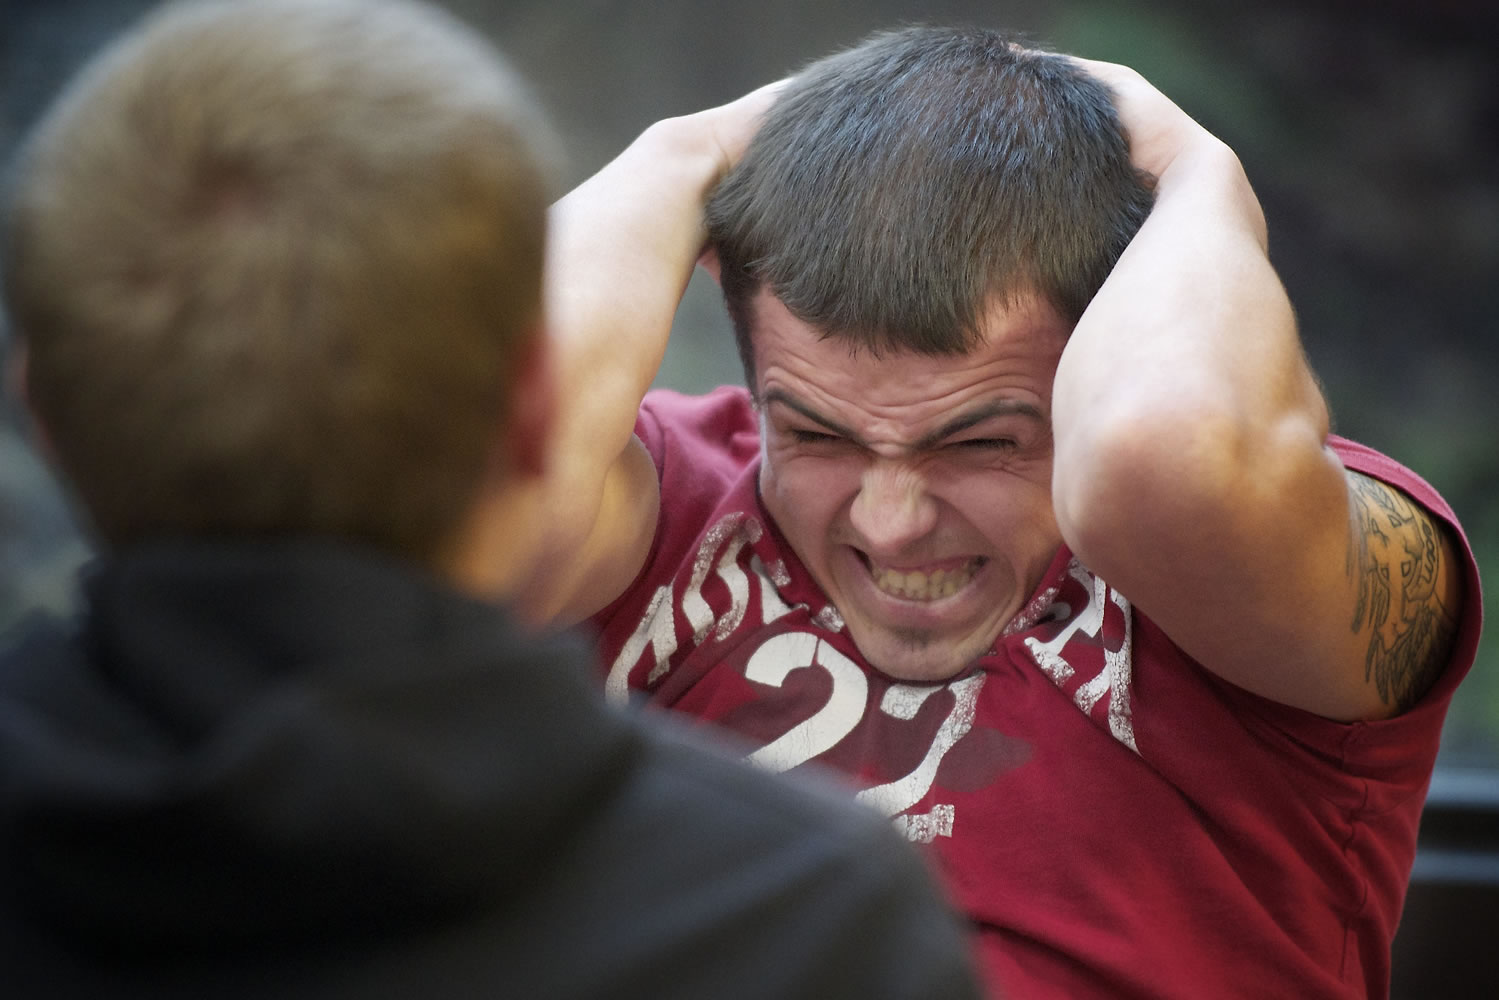 Chris Roper, 24, of Vancouver takes a sit-up test during an open cadet testing event hosted Saturday by the Washington State Patrol. Roper completed 32 sit-ups during the one-minute test, six short of the required minimum for his age group.